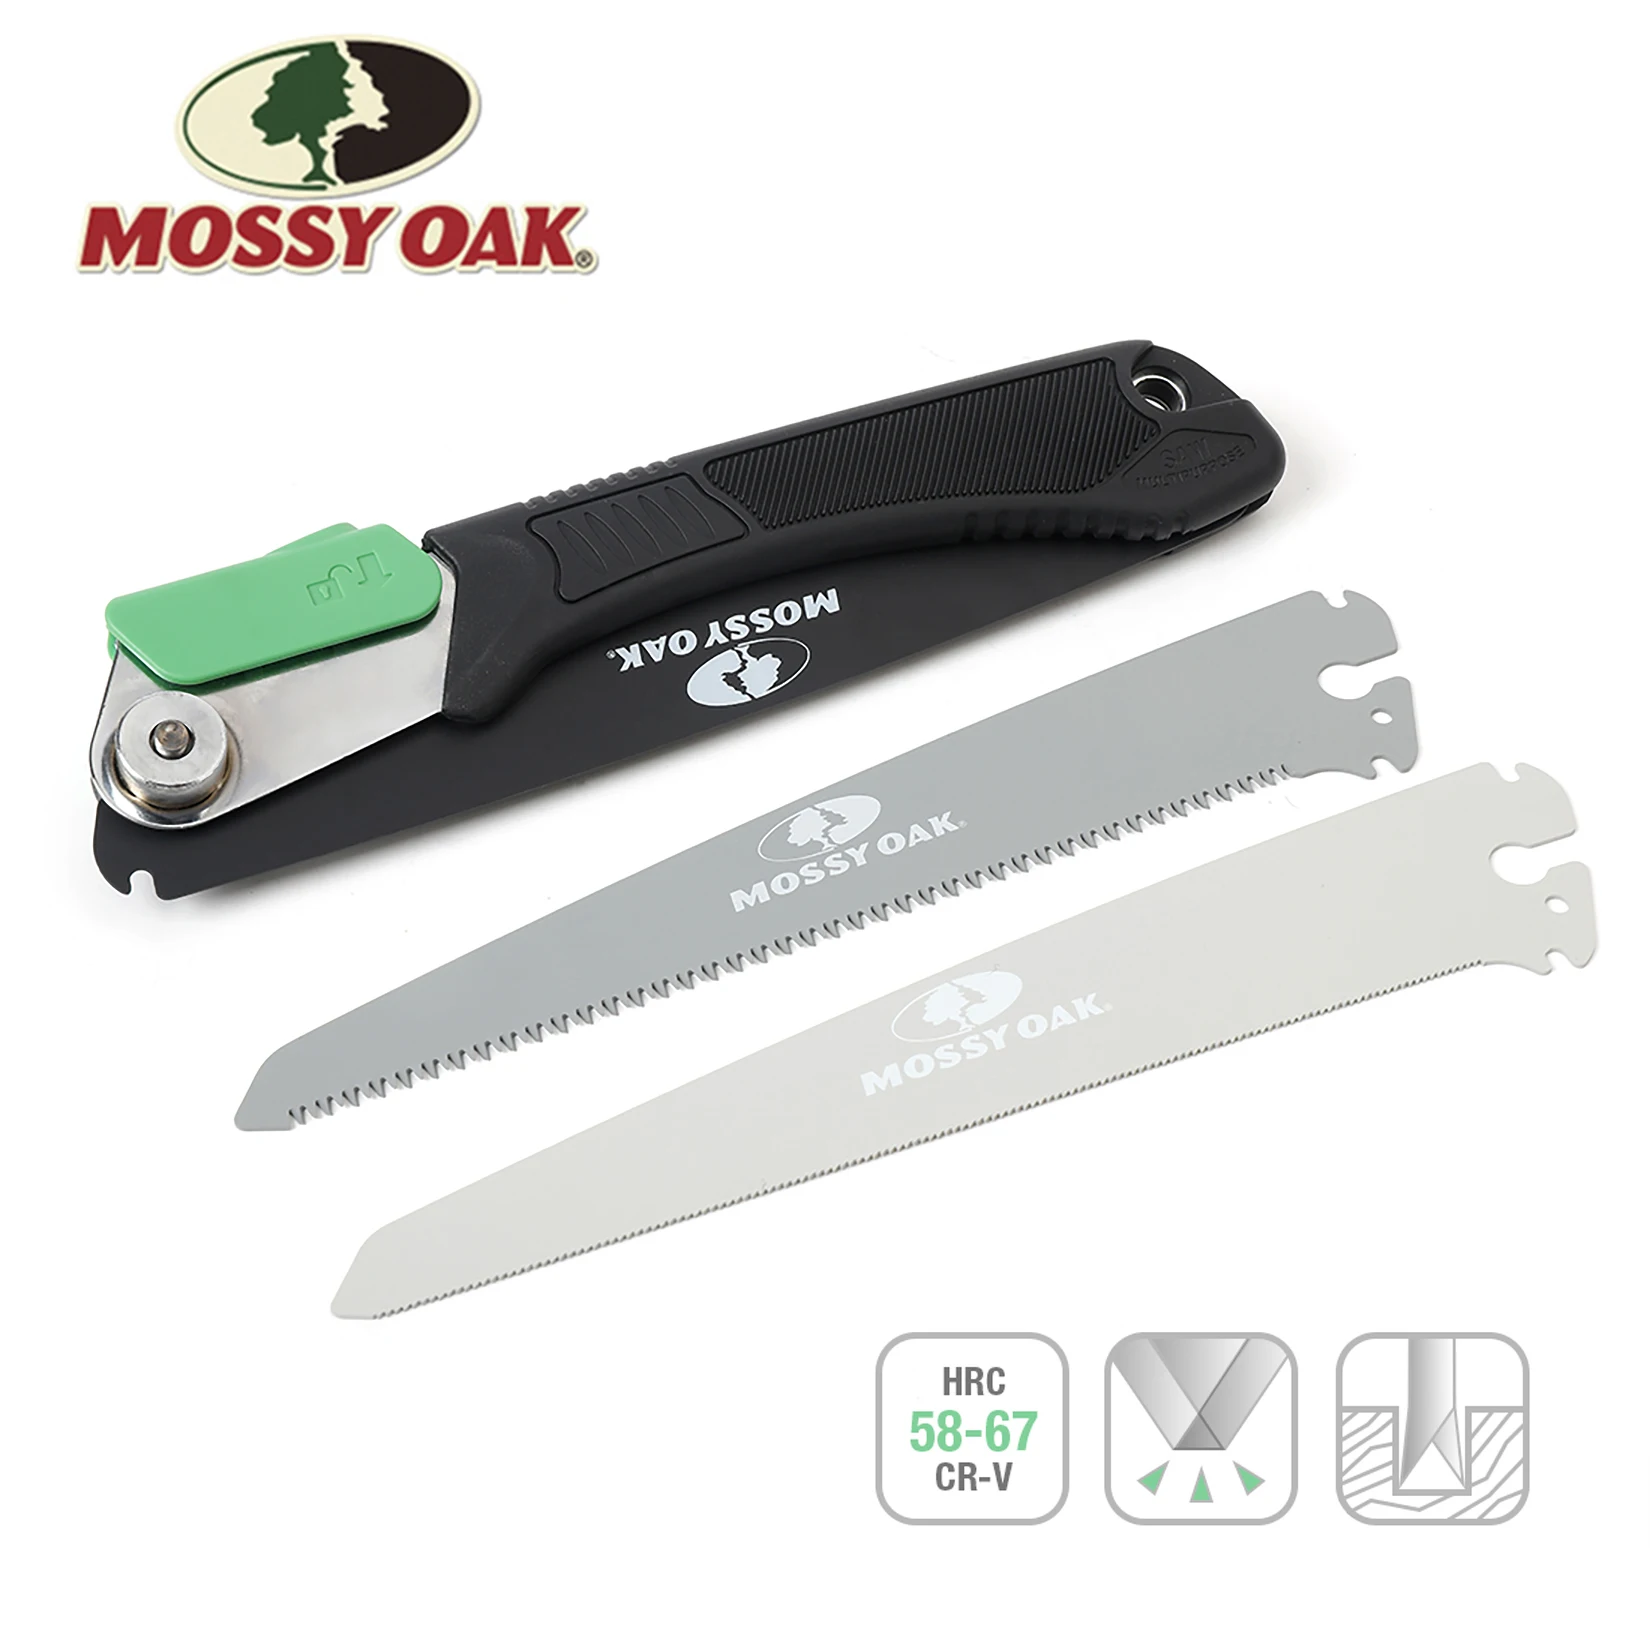 MOSSY OAK 3 in 1 Folding Saw Garden Pruners Folding Saw for Trees and Wood Cutting Folding Camping Saw with Pouch